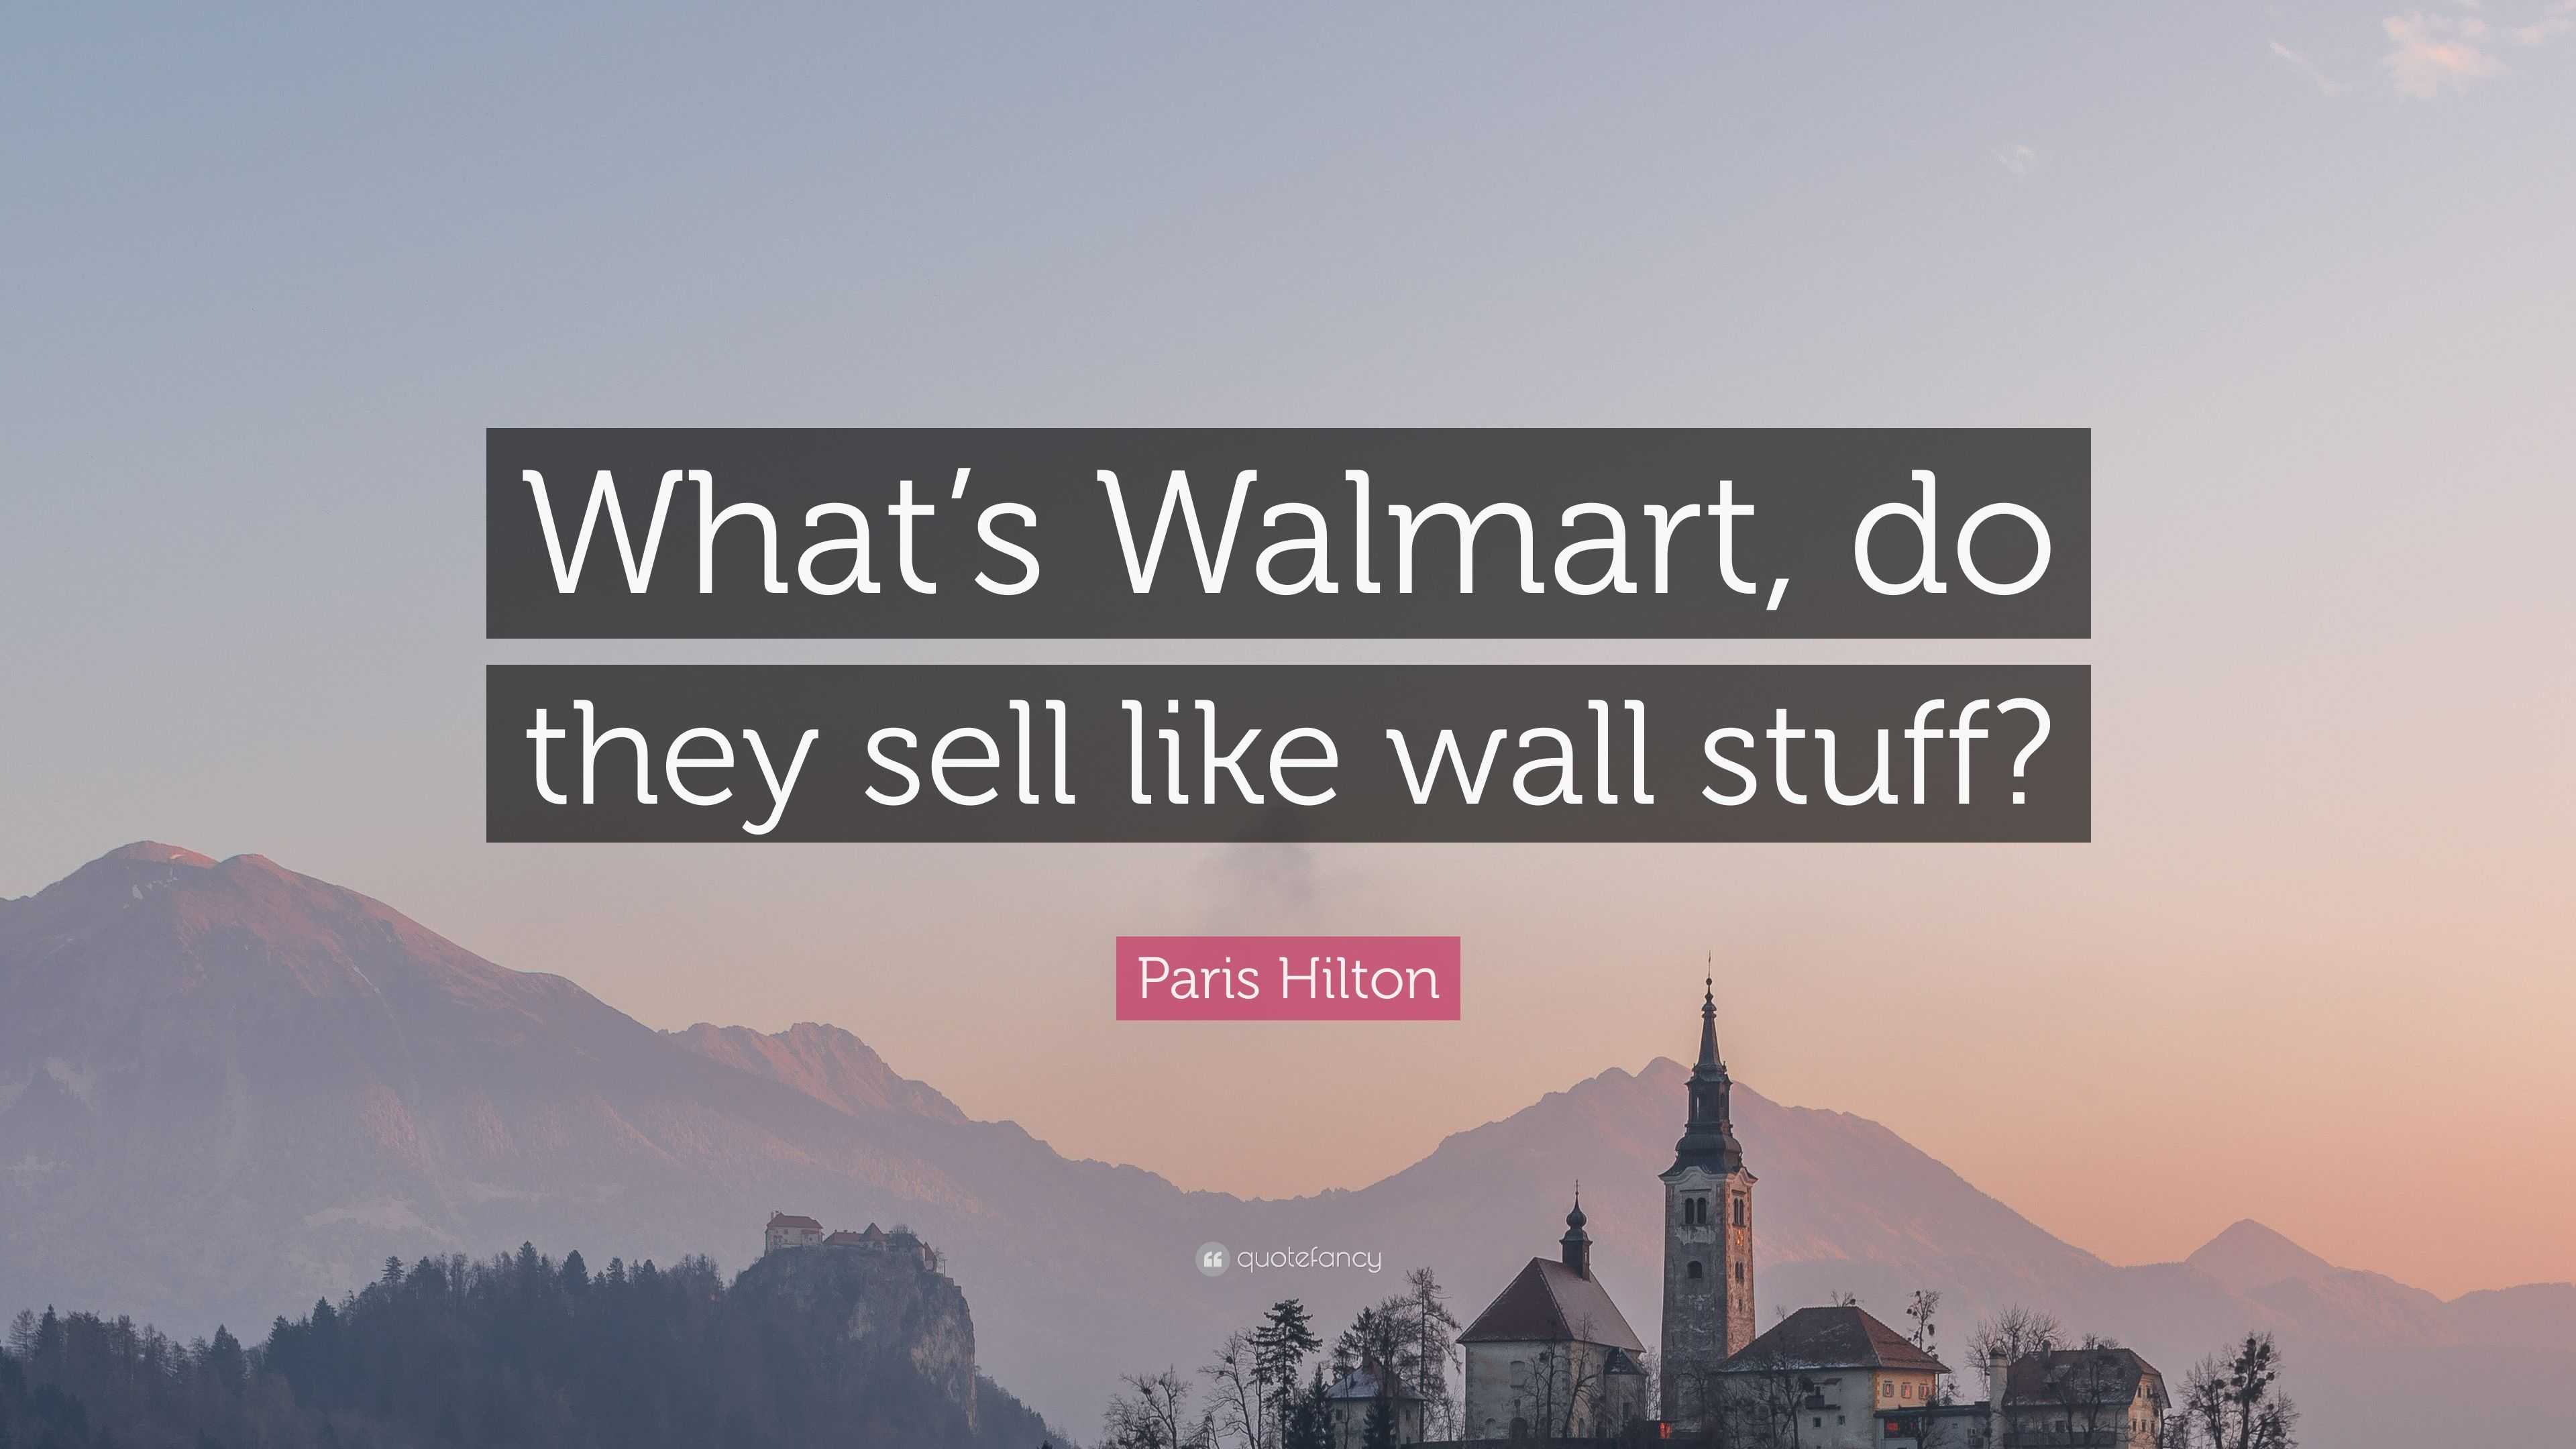 https://quotefancy.com/media/wallpaper/3840x2160/2259902-Paris-Hilton-Quote-What-s-Walmart-do-they-sell-like-wall-stuff.jpg